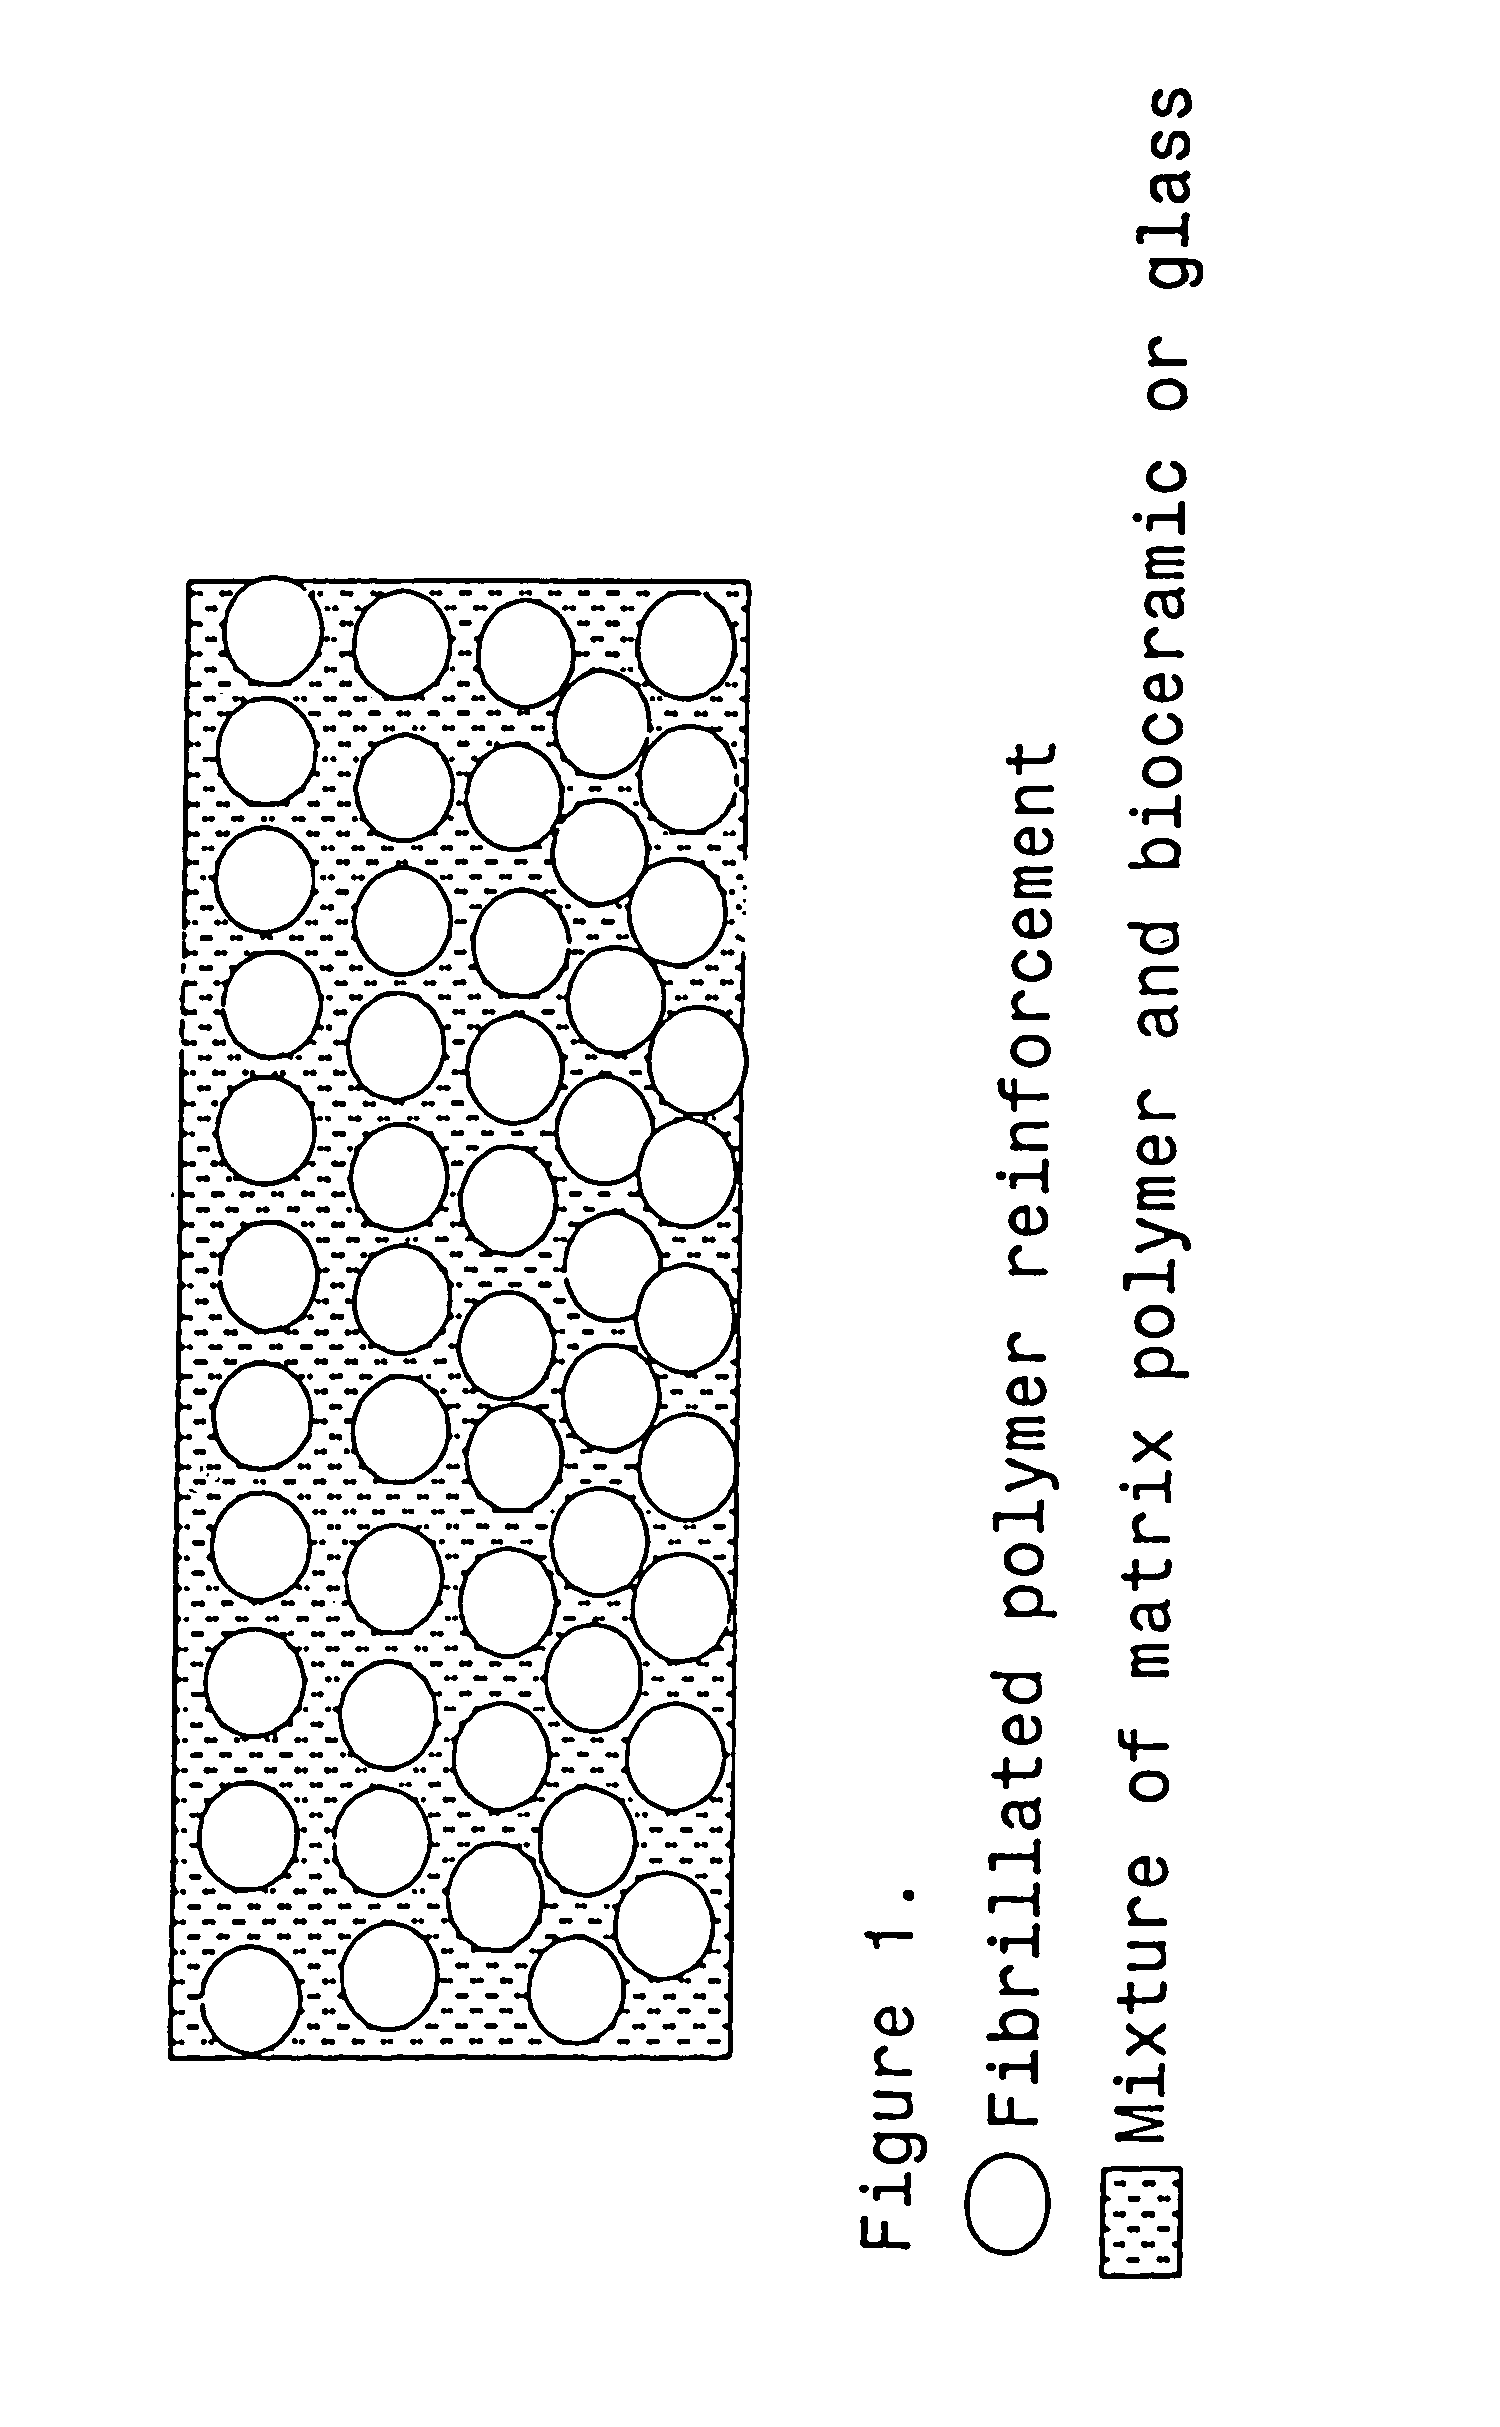 Bioactive and biodegradable composites of polymers and ceramics or glasses and method to manufacture such composites